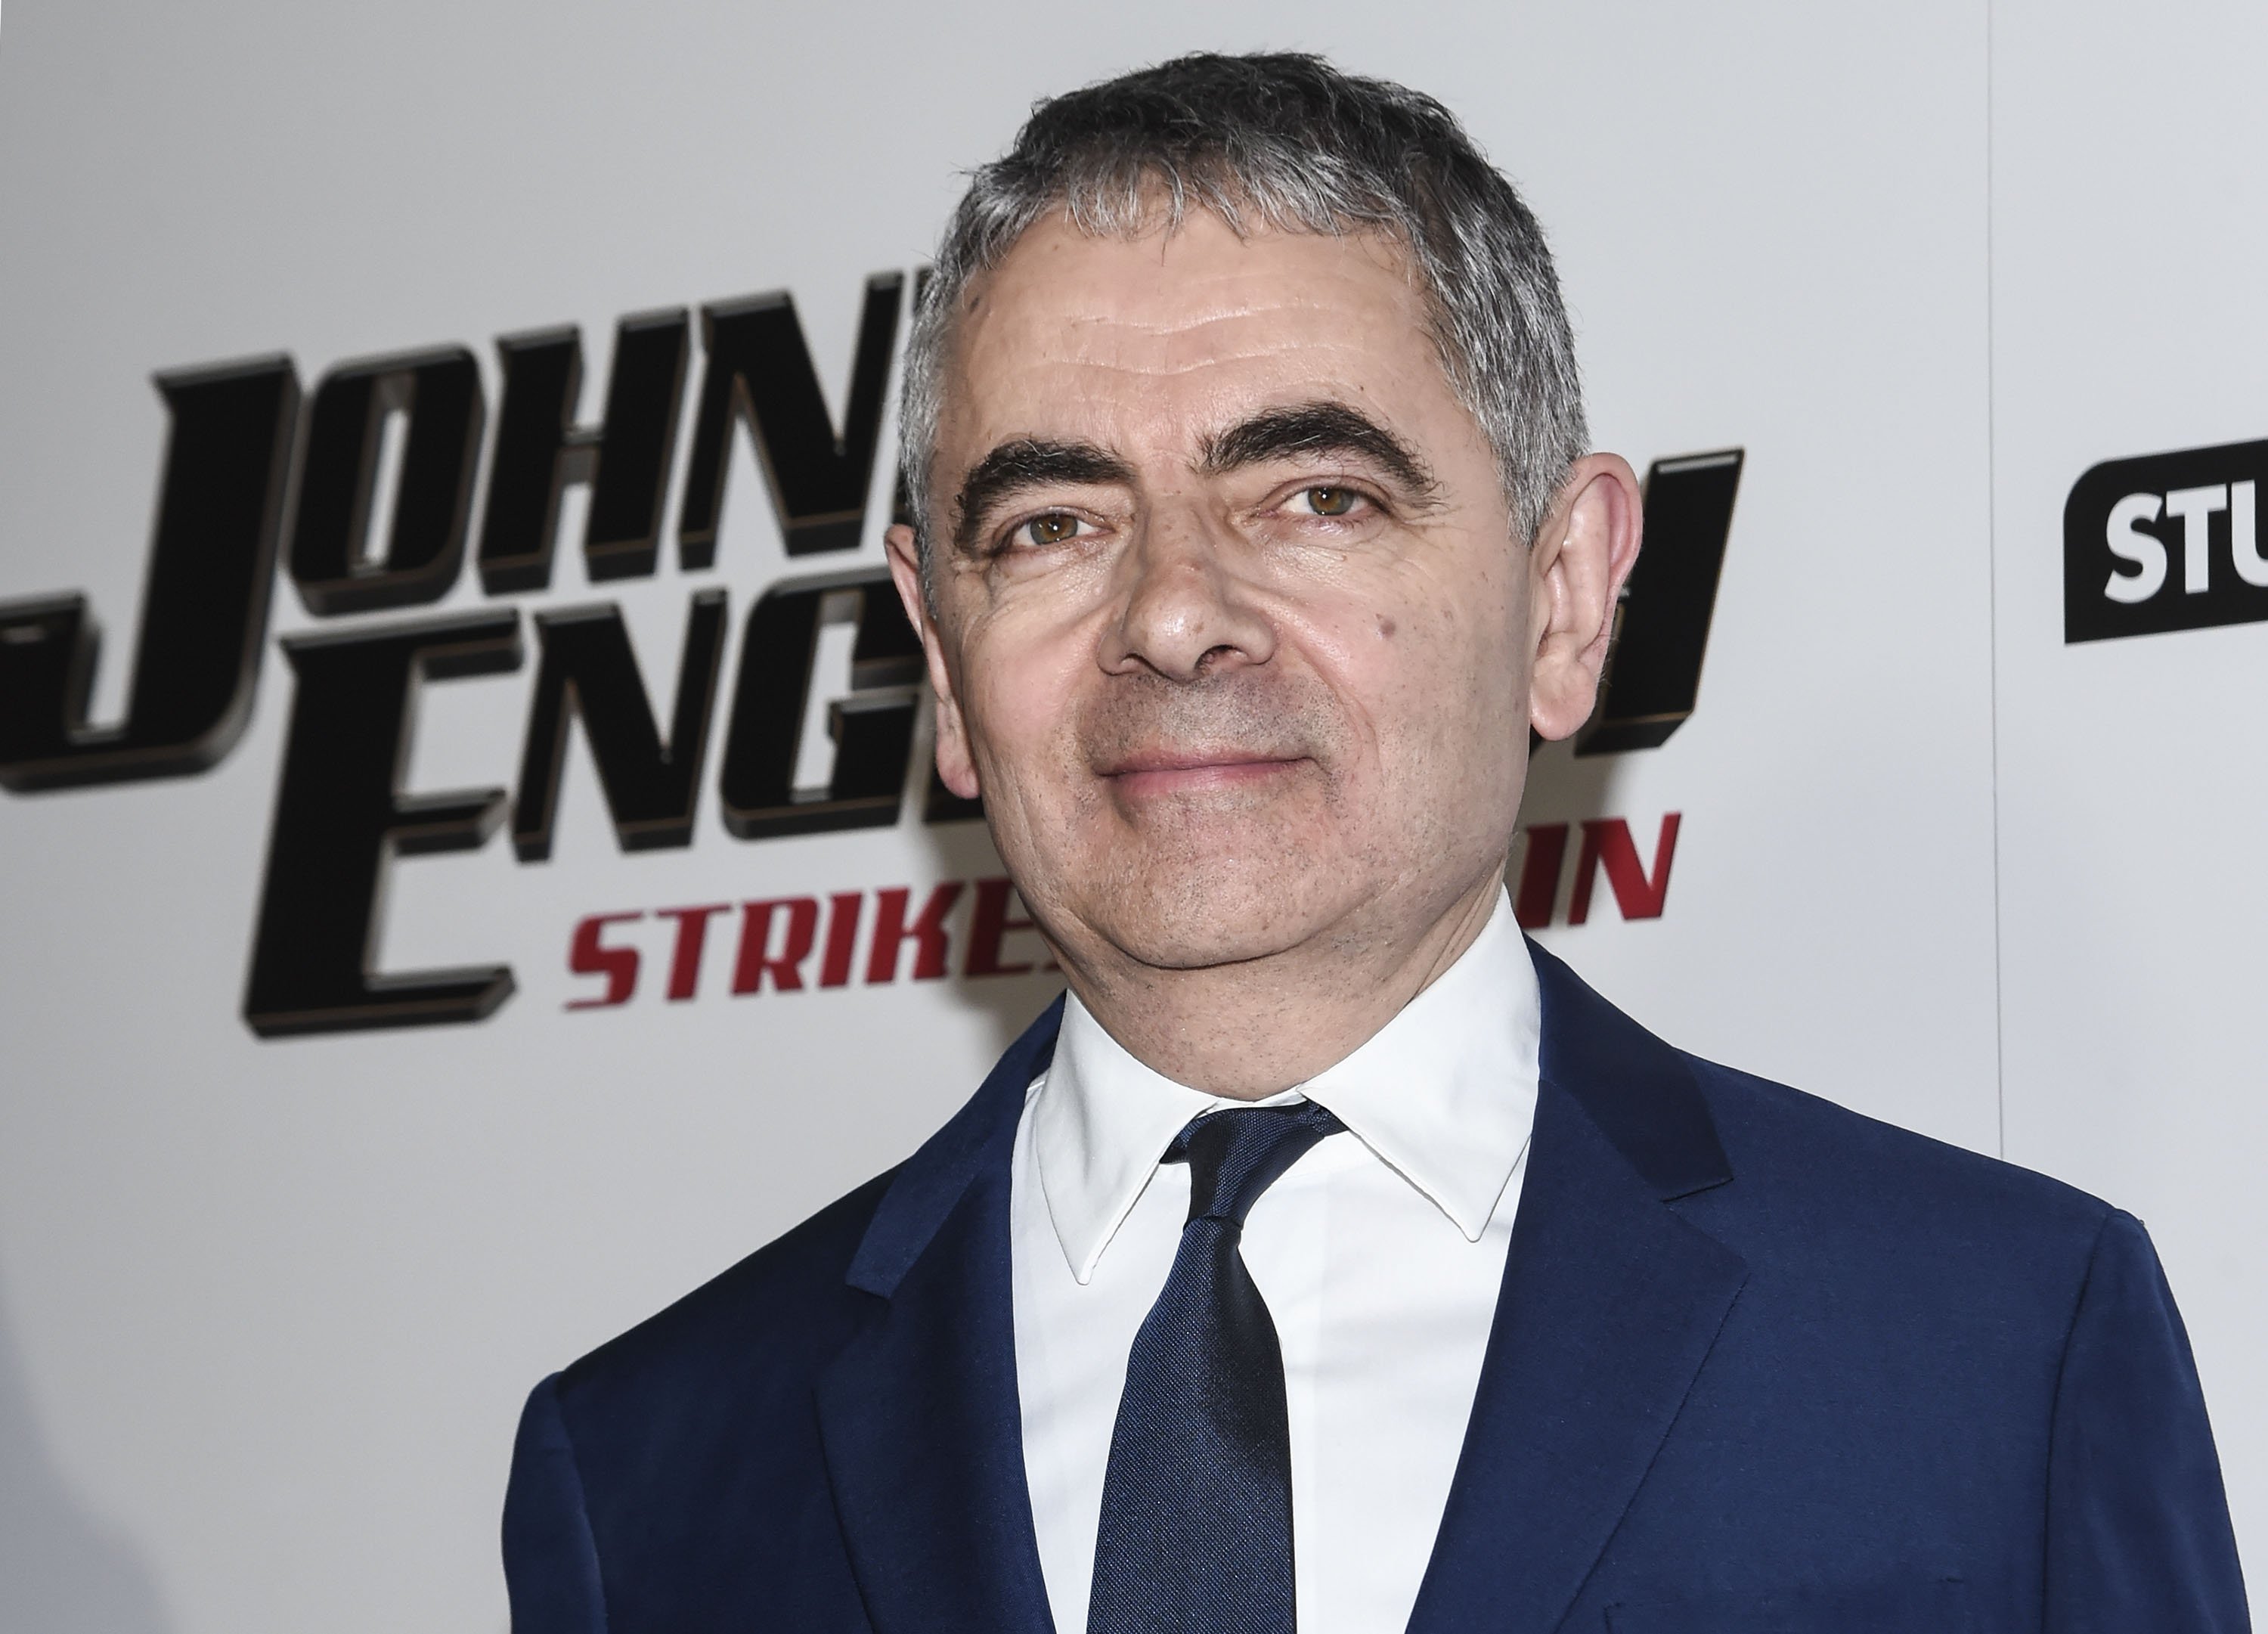 Rowan Atkinson attends the "Johnny English Strikes Again" New York Screening on October 23, 2018, in New York City. I Source: Getty Images